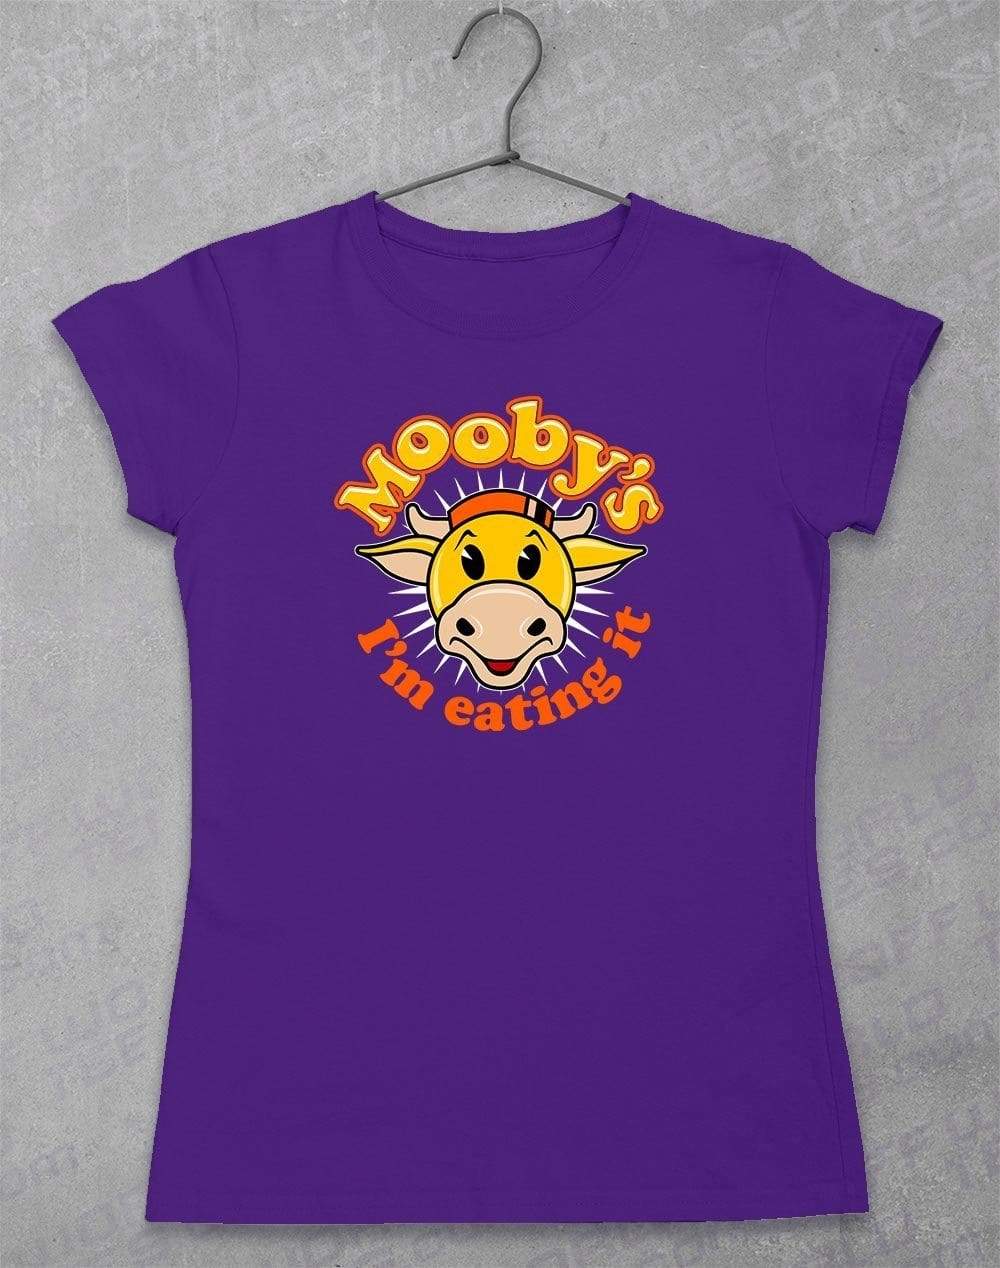 Moobys Women's T-Shirt 8-10 / Lilac  - Off World Tees